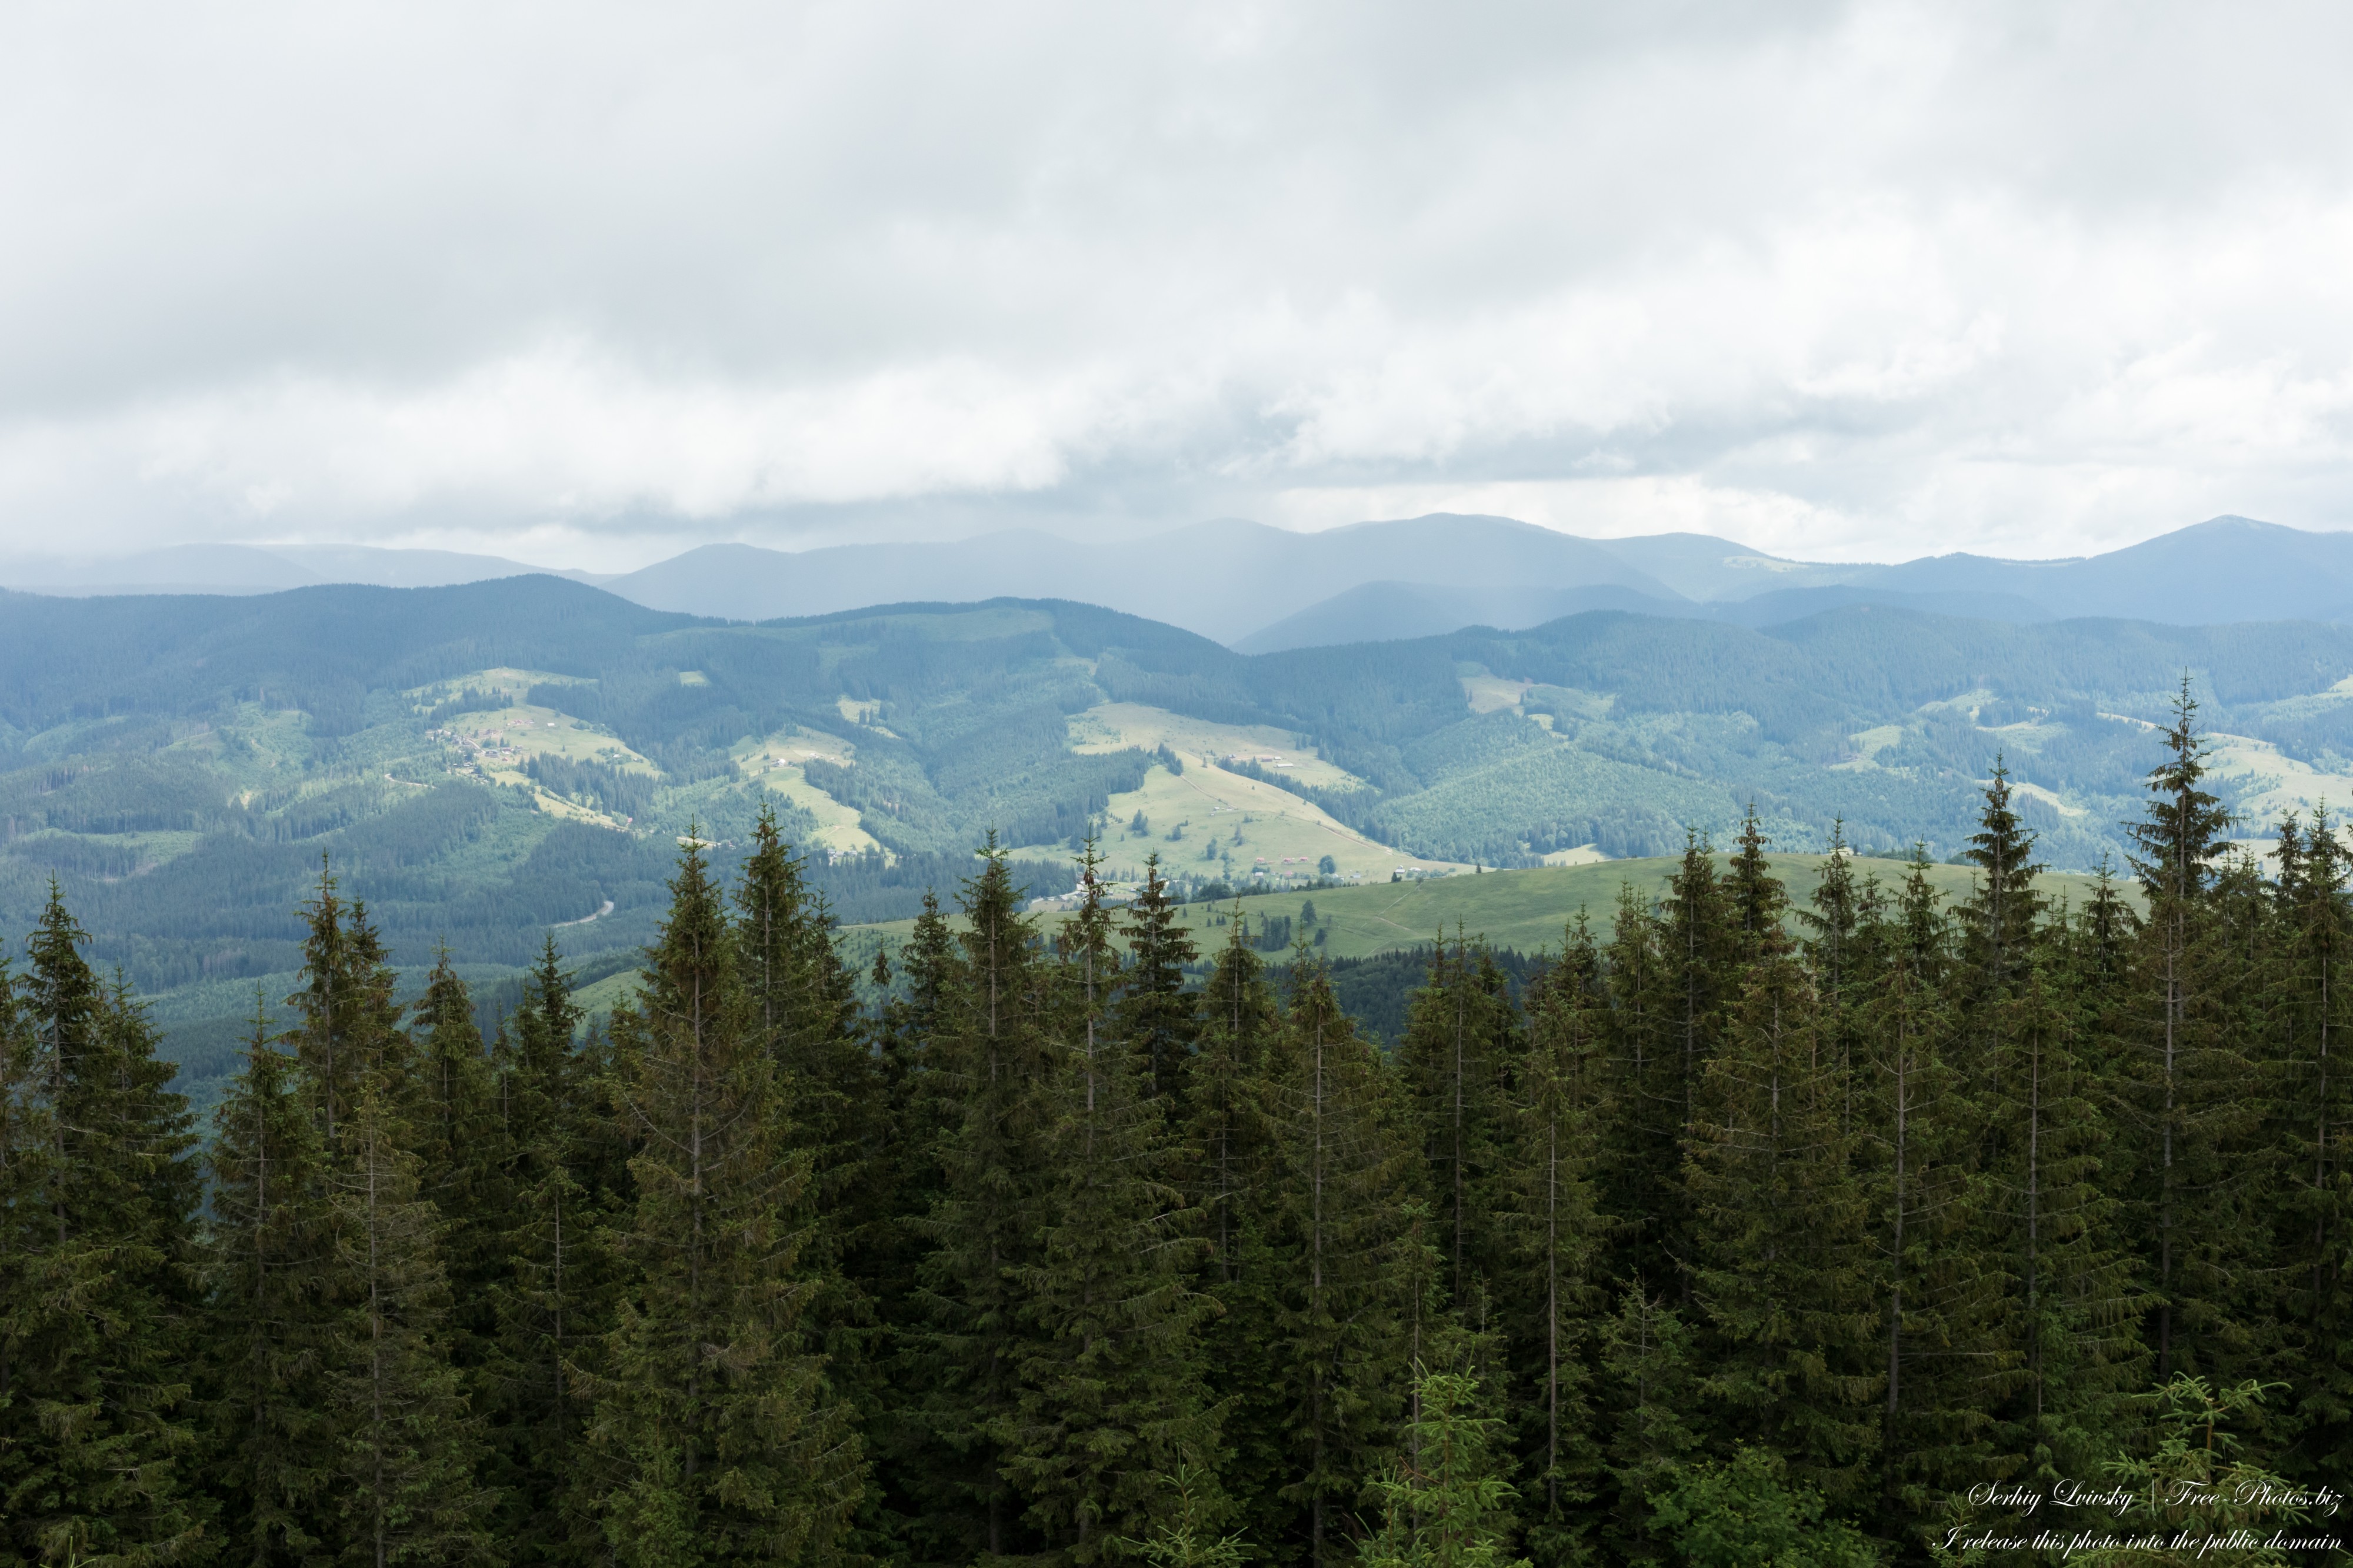 Carpathian mountains in Ukraine photographed in July 2022 by Serhiy Lvivsky, picture 11